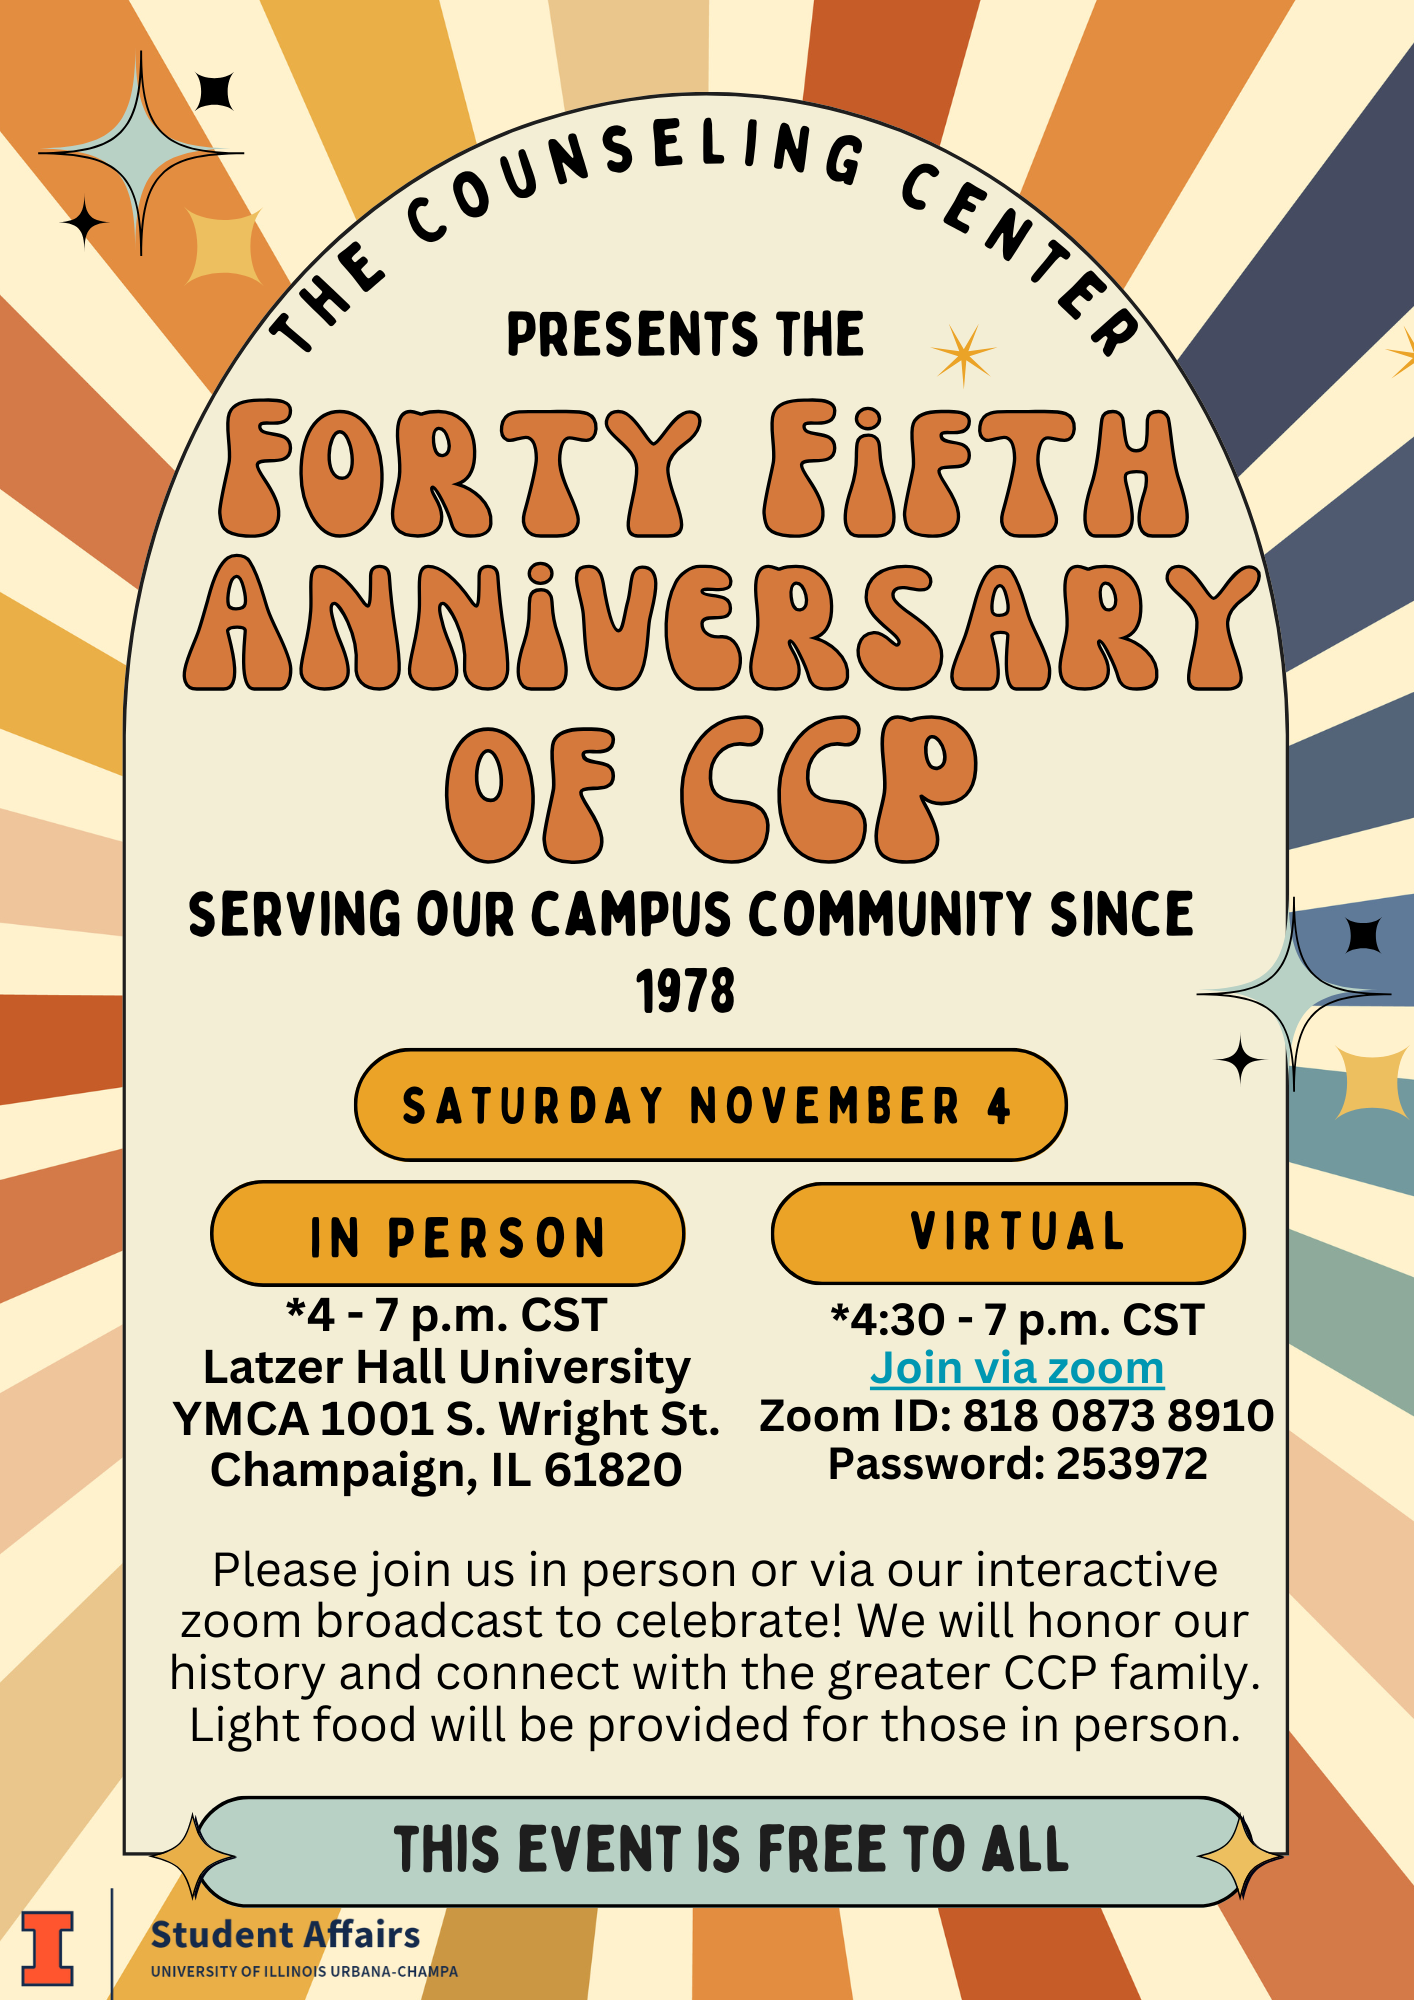 The Counseling Center Presents the 45th Anniversary of CCP serving our campus community since 1978 Saturday November 4 In person *4 - 7 p.m. CST Latzer Hall University YMCA 1001 S. Wright St. Champaign, IL 61820 virtual  *4:30 - 7 p.m. CST Join via zoom Z